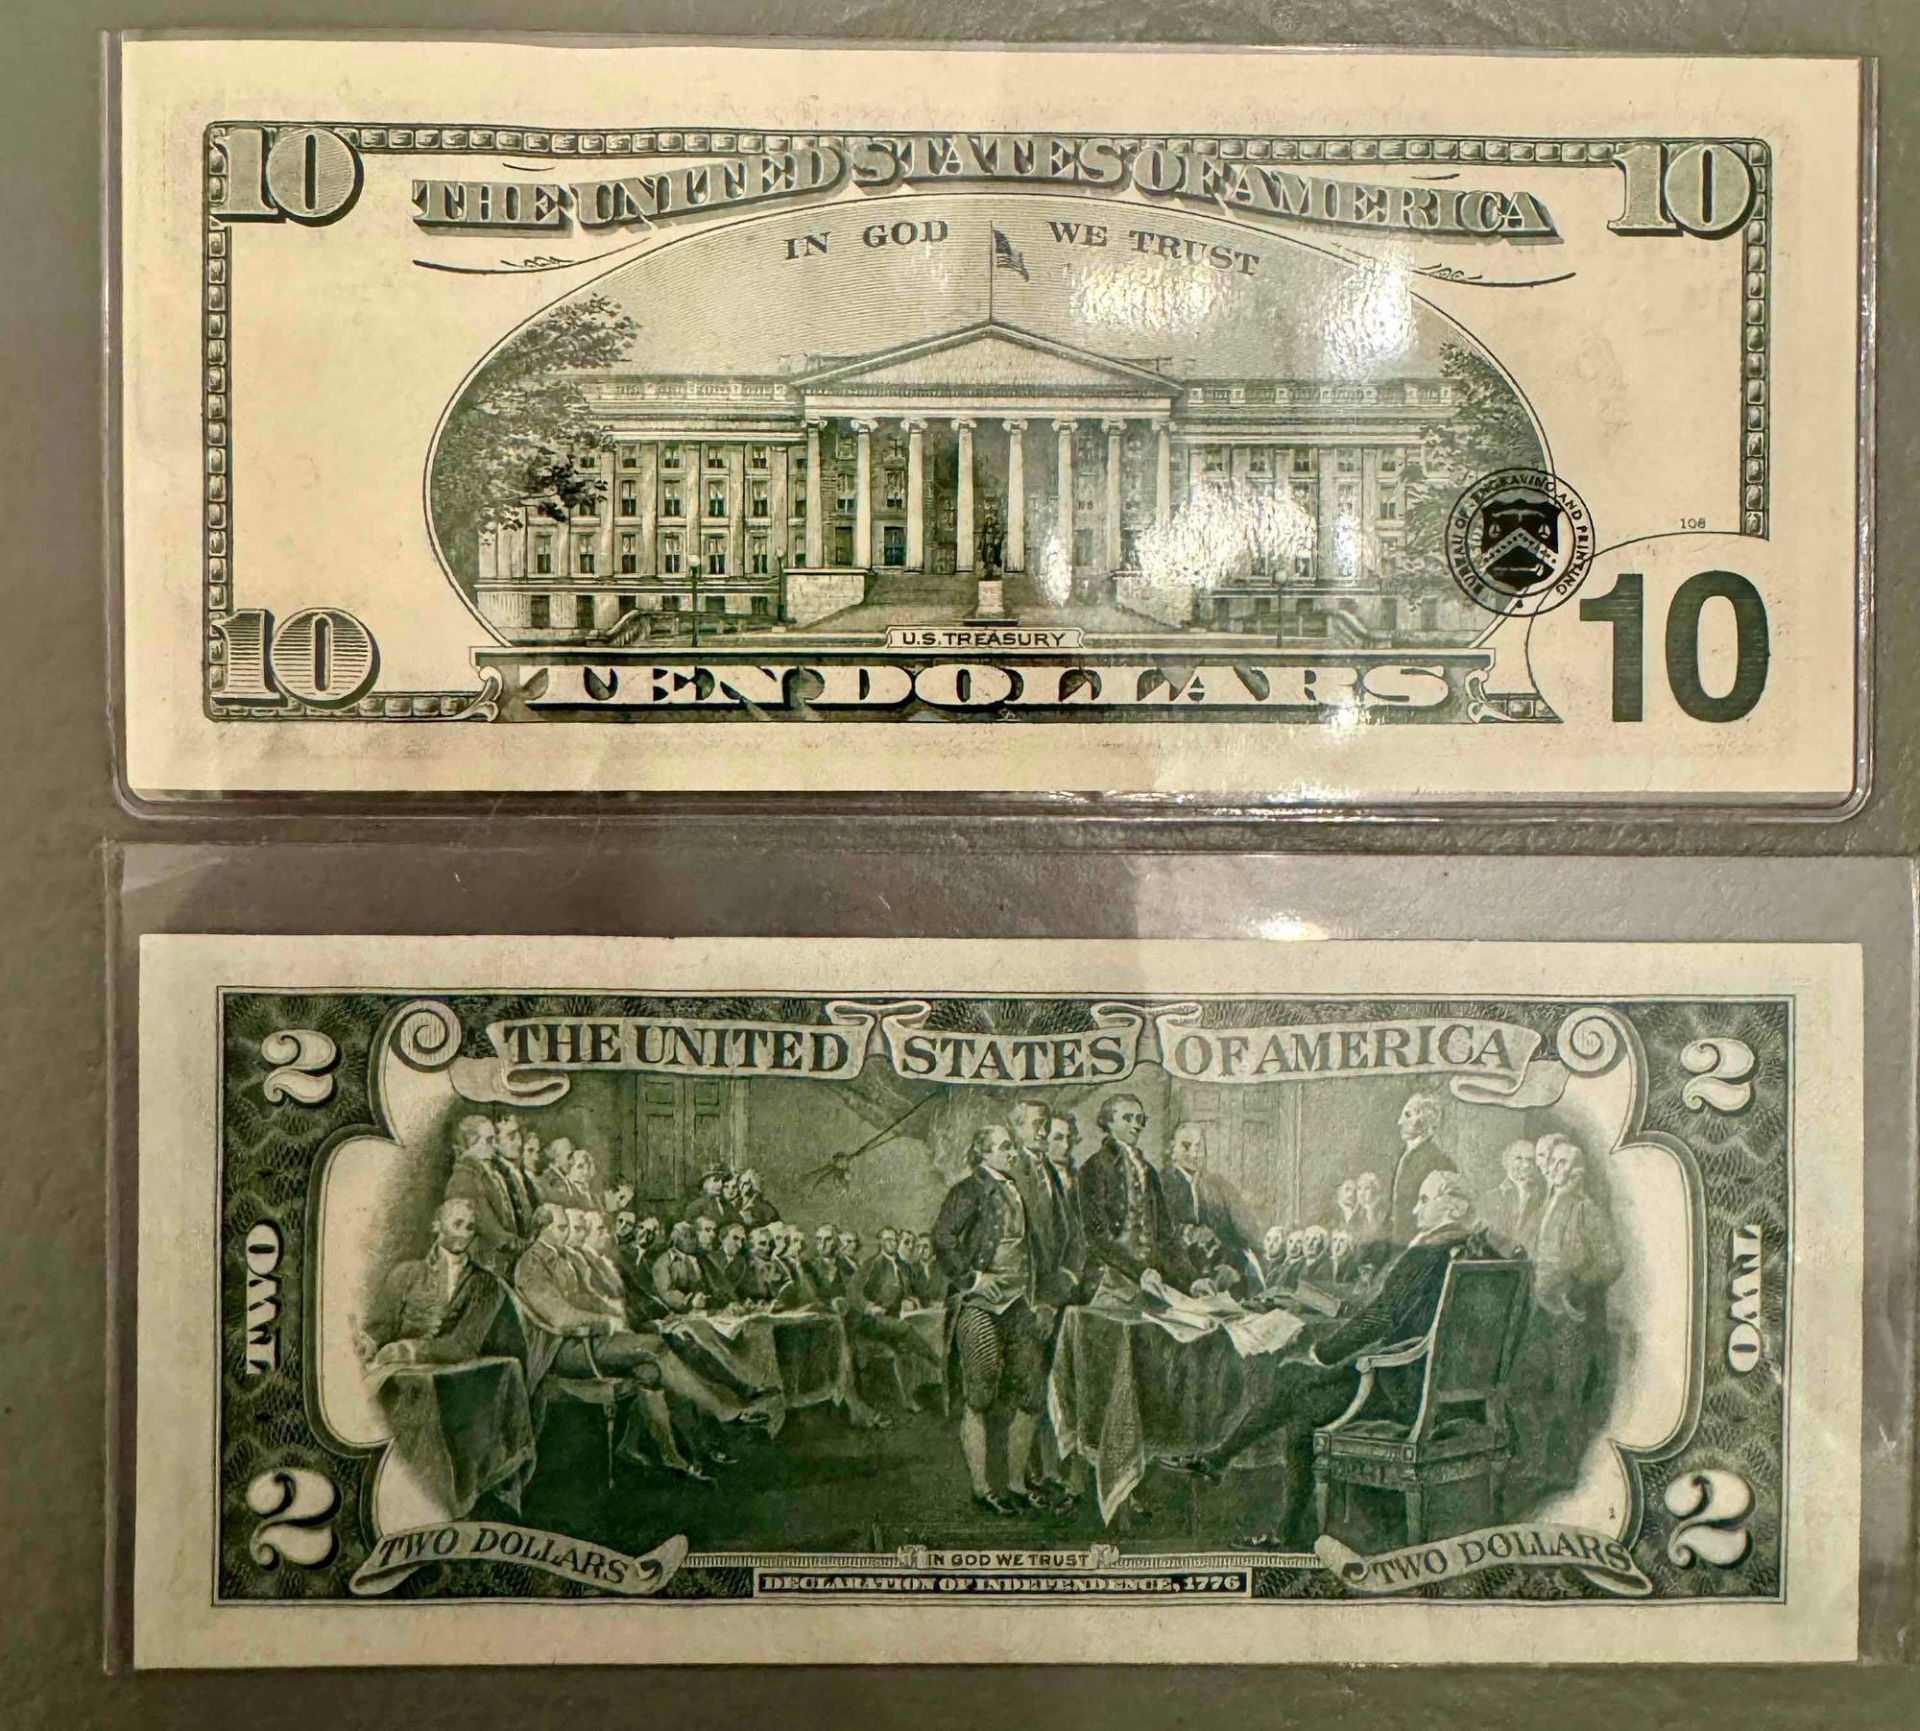 Currency uncirculated notes: 1999 $10 Star Note, 1976 First Day issue w/stamp $2 note, 1963 $1 Note, - Image 3 of 6